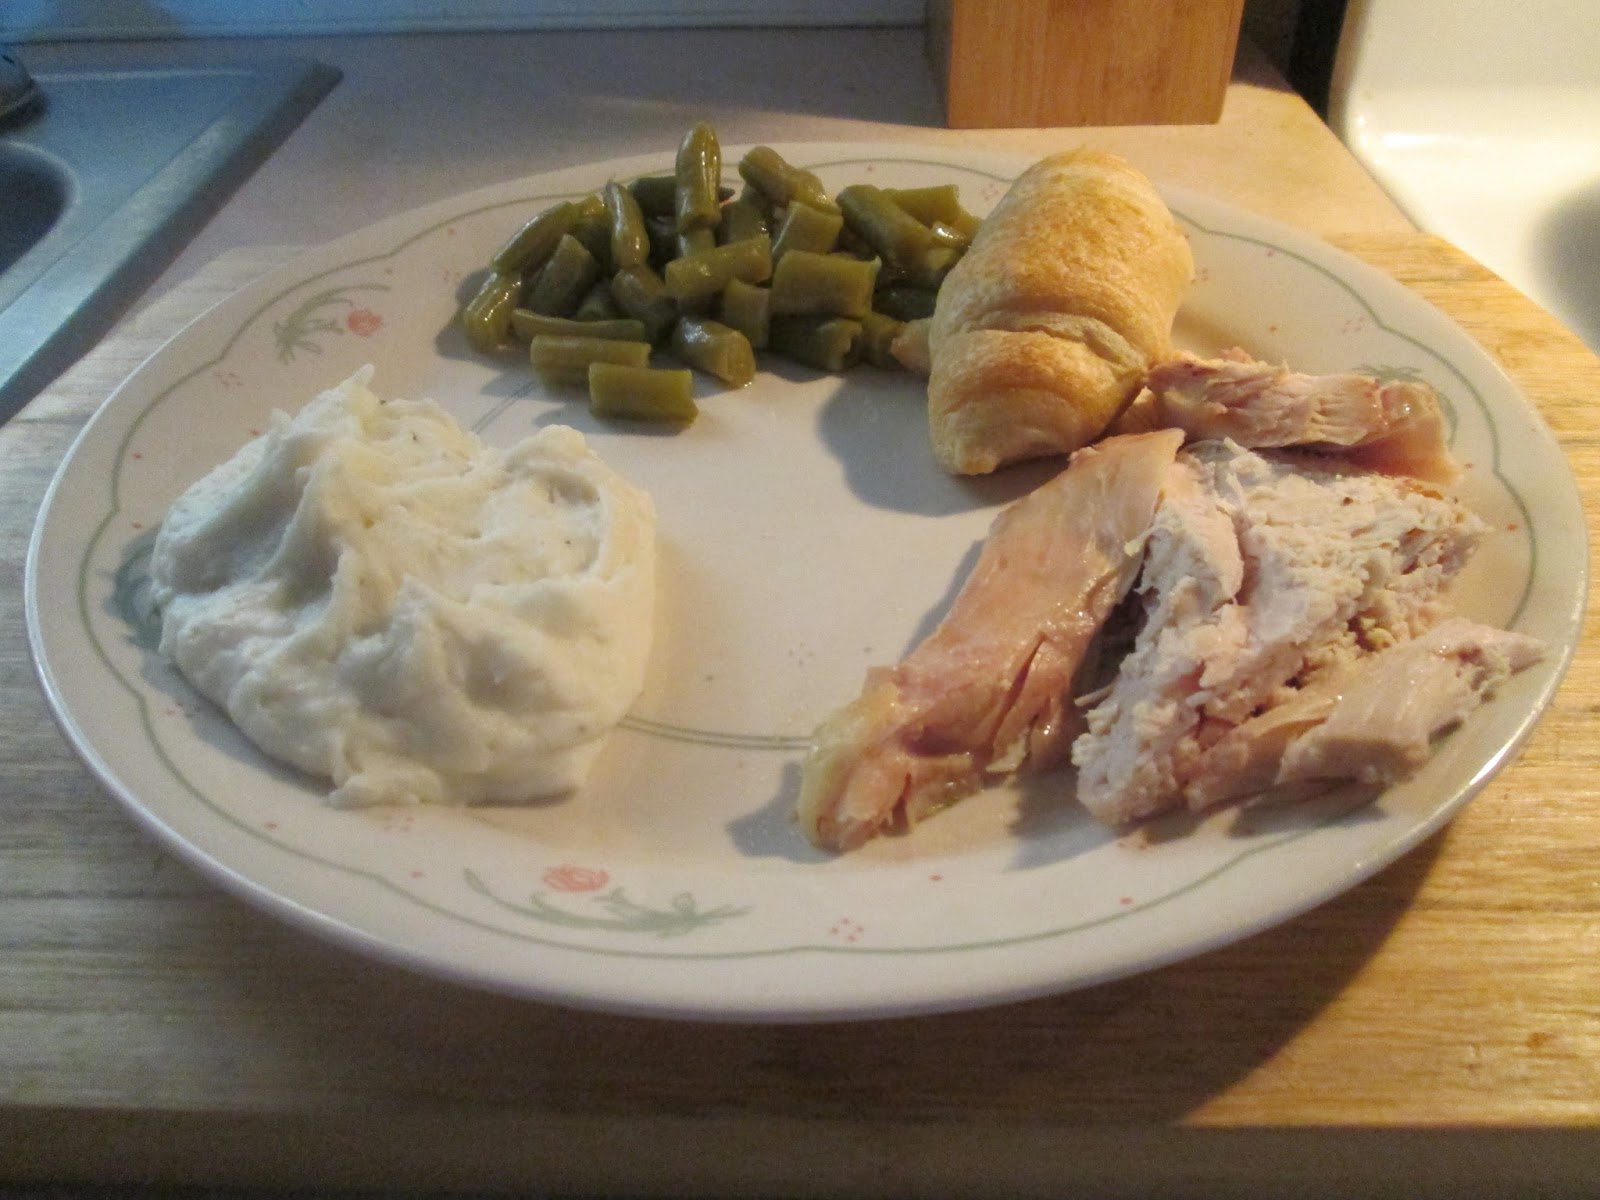 Diab2cook Baked Bone In Whole Chicken Breast W Mashed Potatoes And Canned Green Beans,Creamy White Chicken Chili Crockpot